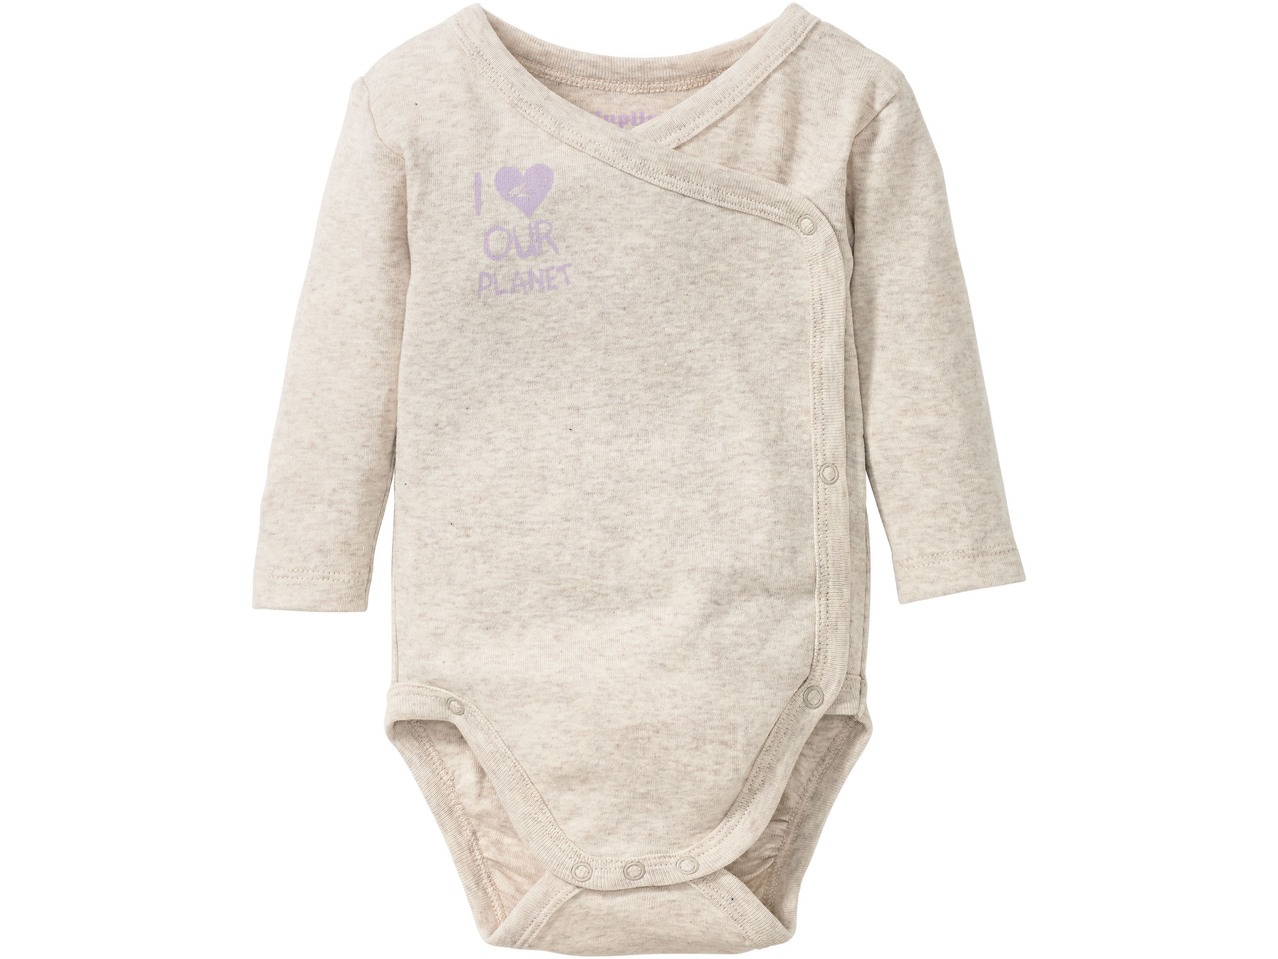 Baby Long-Sleeved Bodysuits, 2 pieces